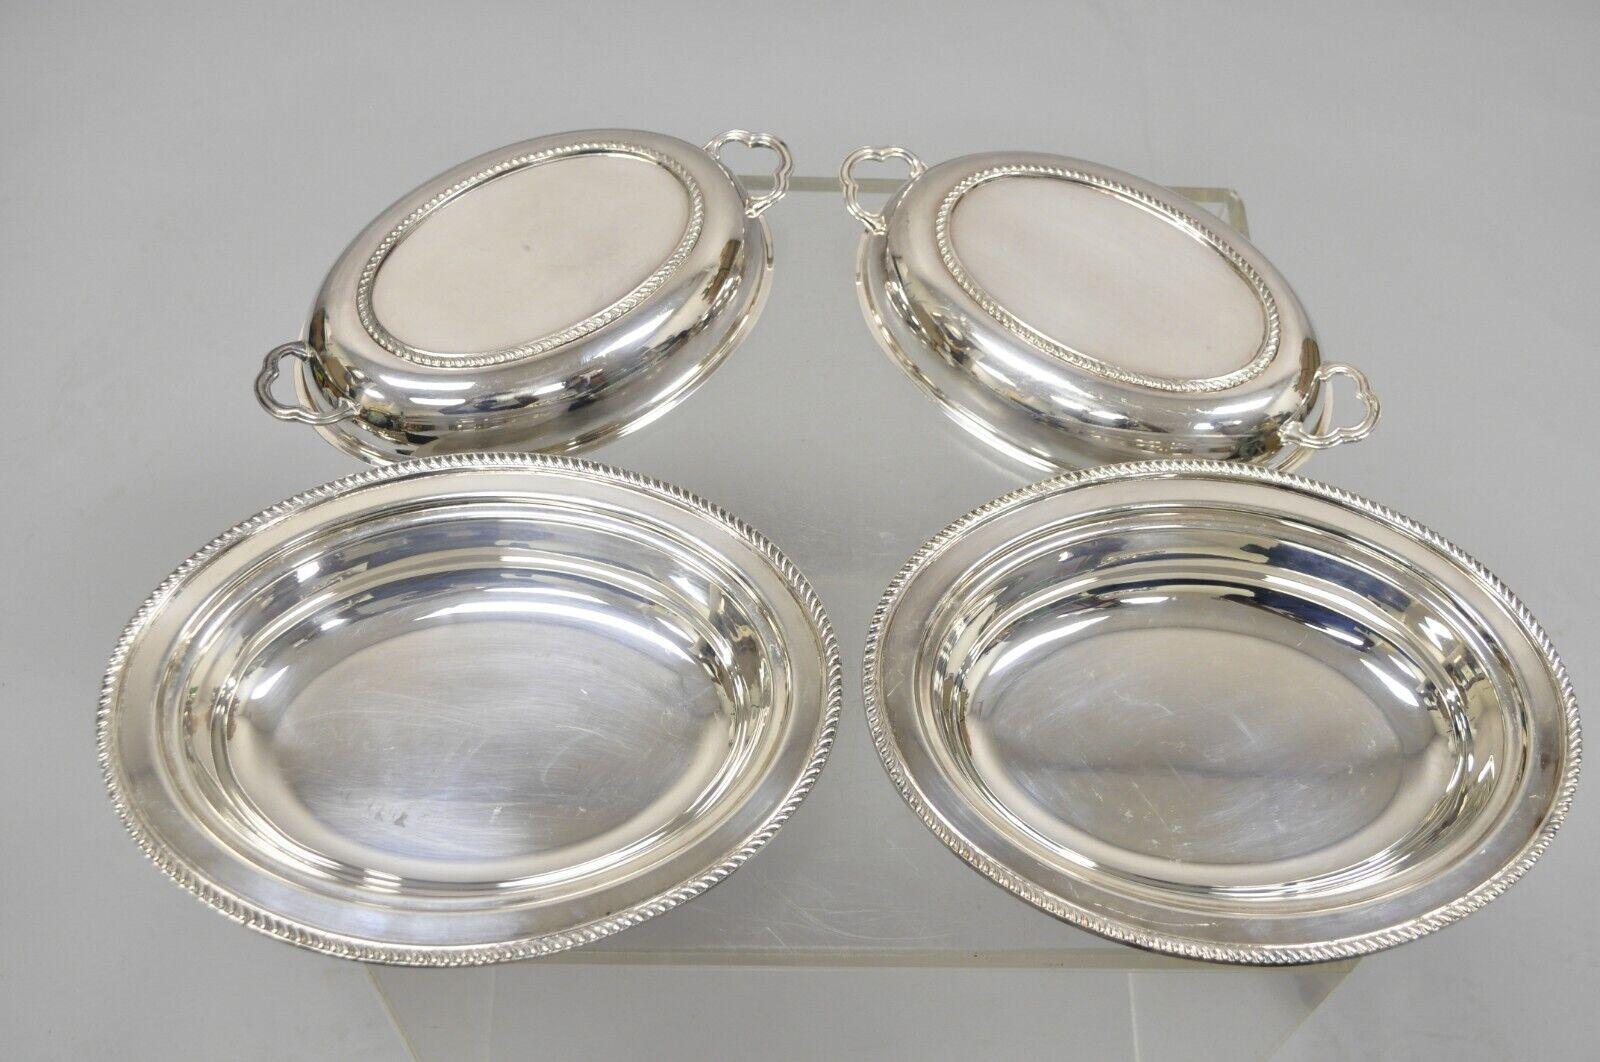 Vintage Poole Silver Co Silver Plated Lidded Serving Platter Dish - a Pair For Sale 2